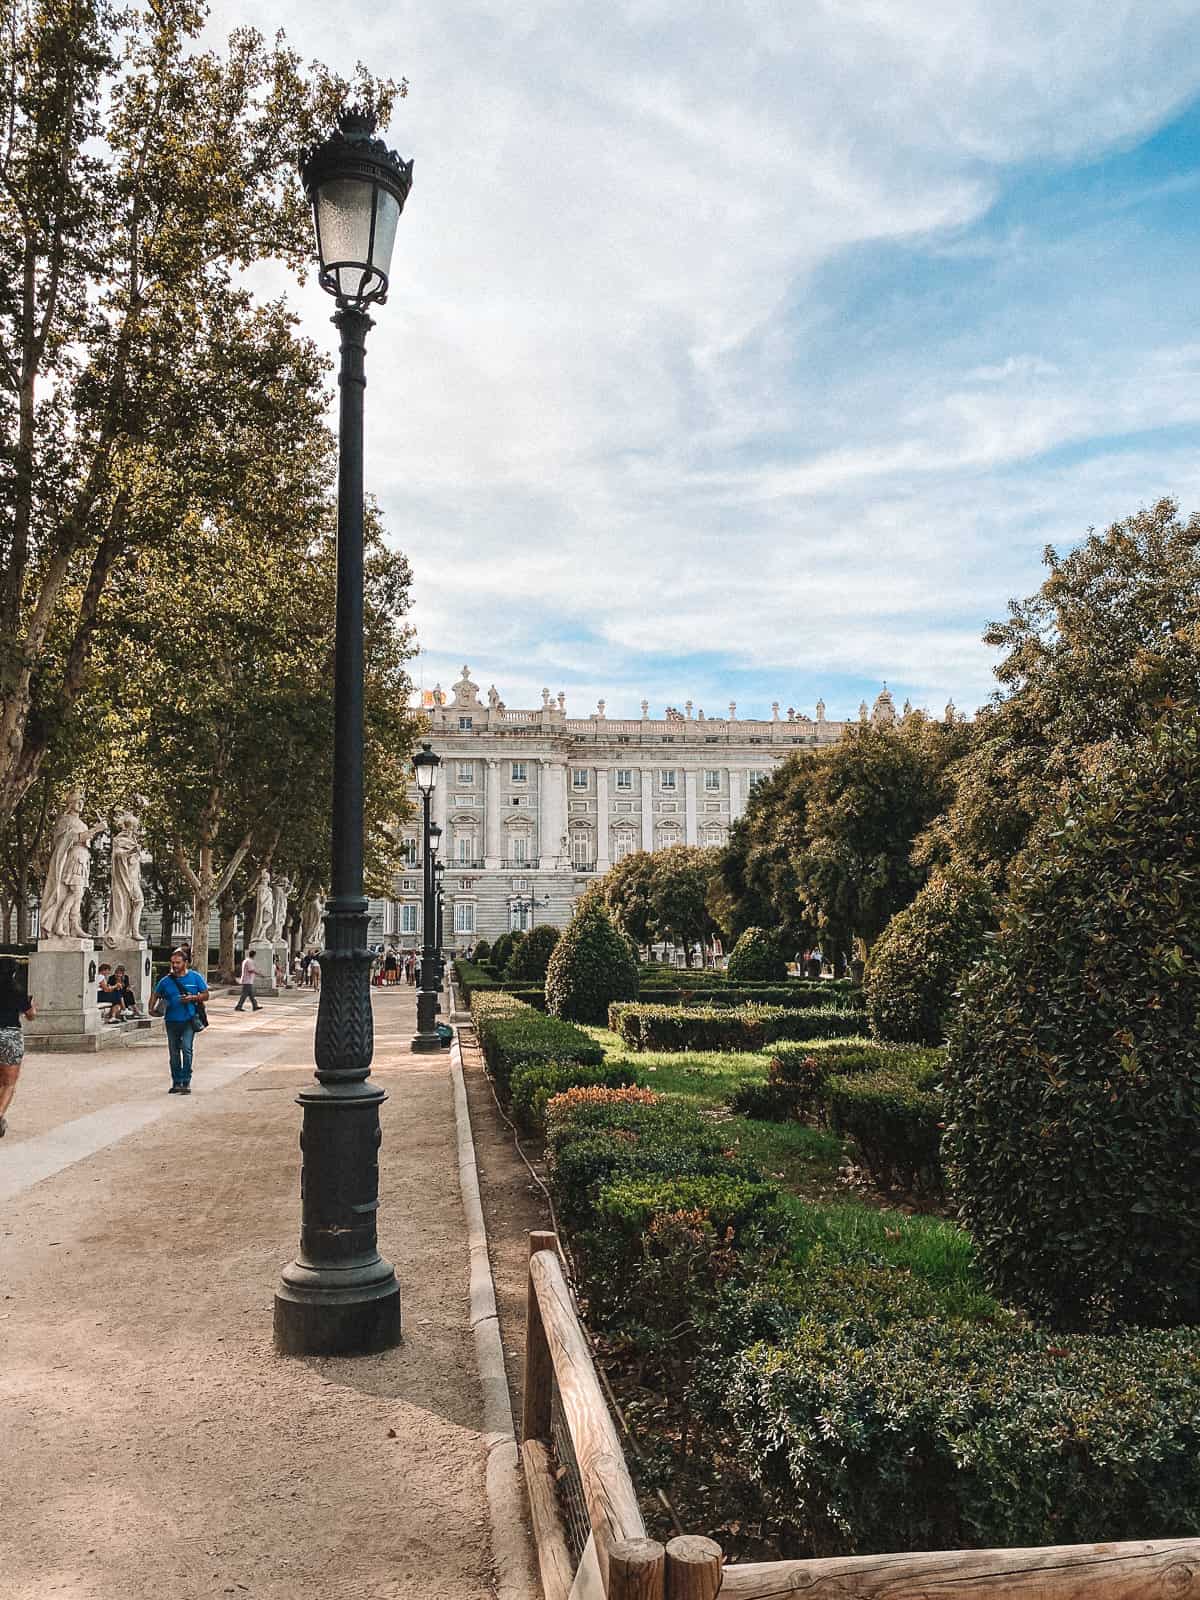 A classic street lamp illuminates a path in Retiro Park, with the Royal Palace of Madrid, Spain, visible in the distance, showcasing the historical and cultural landmarks of the city